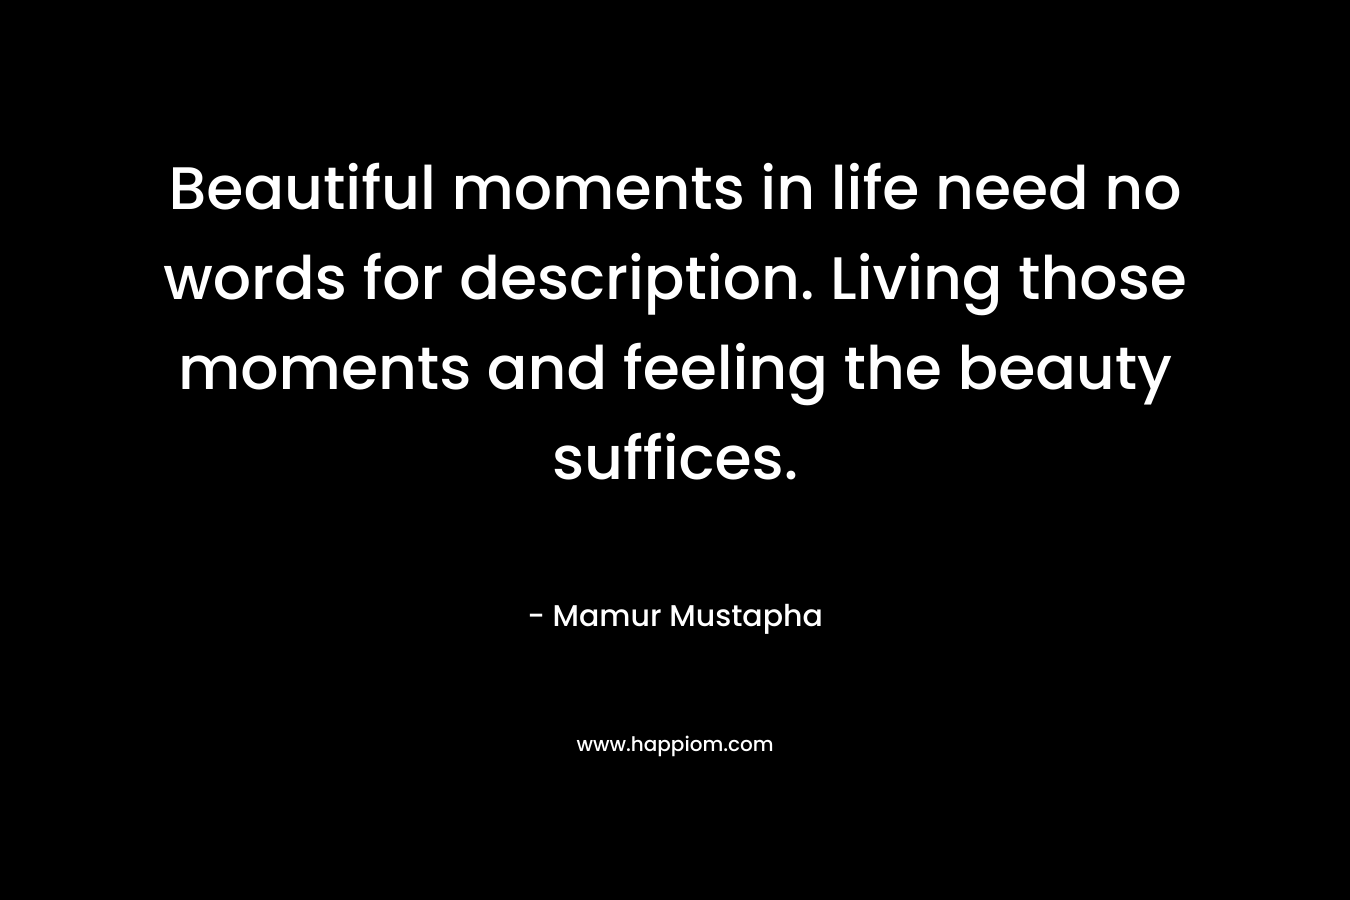 Beautiful moments in life need no words for description. Living those moments and feeling the beauty suffices.